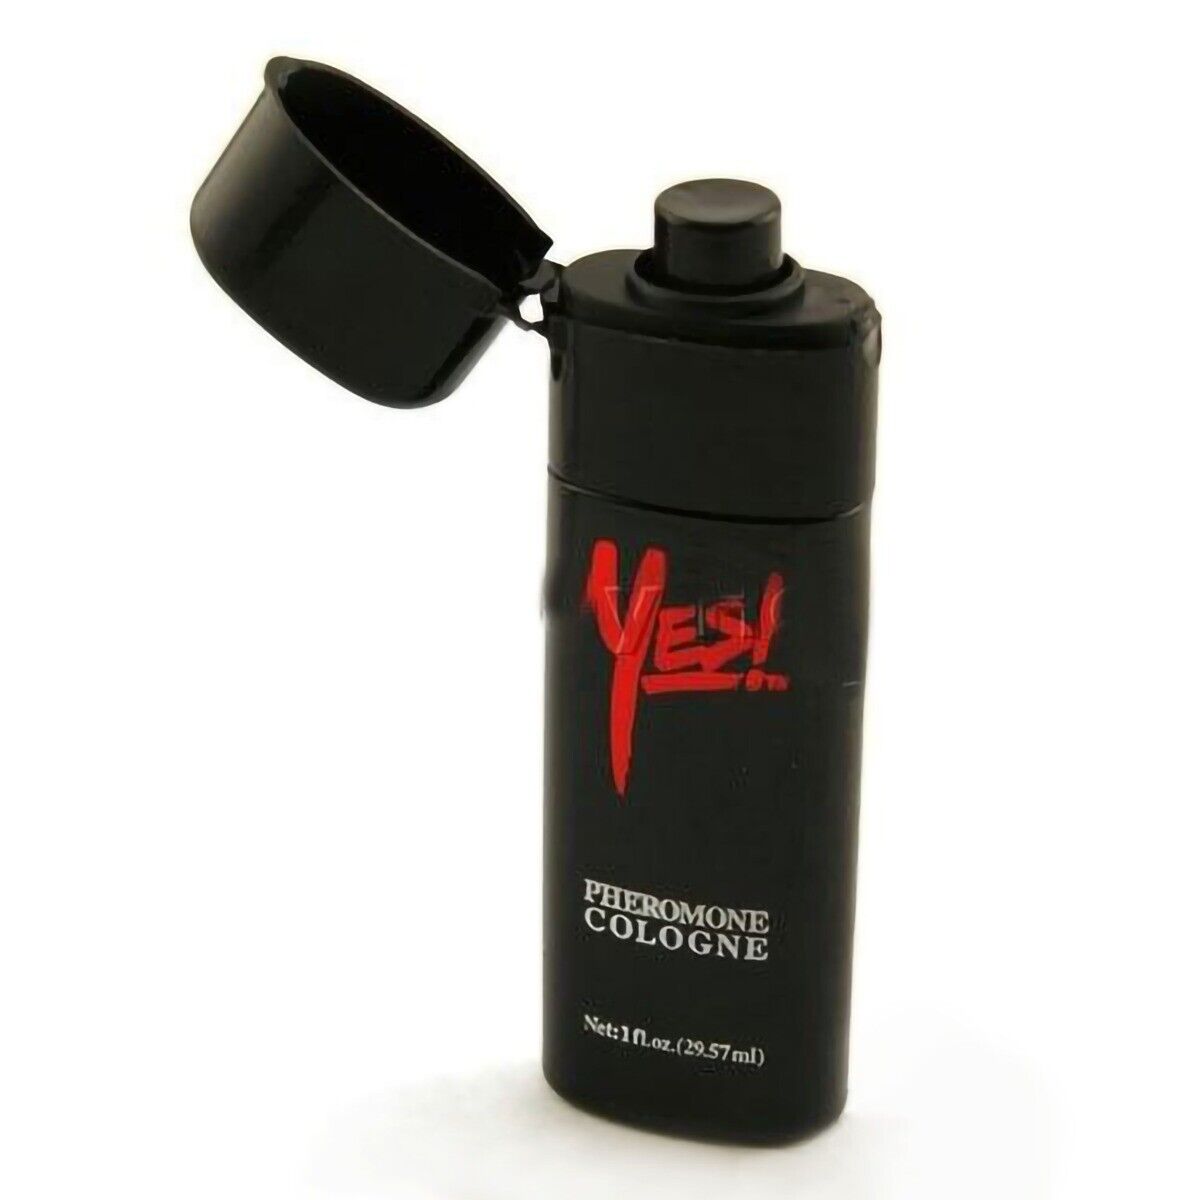 Yes Pheromone Cologne for men Attractant Perfume Attact Female Fragrance Spray